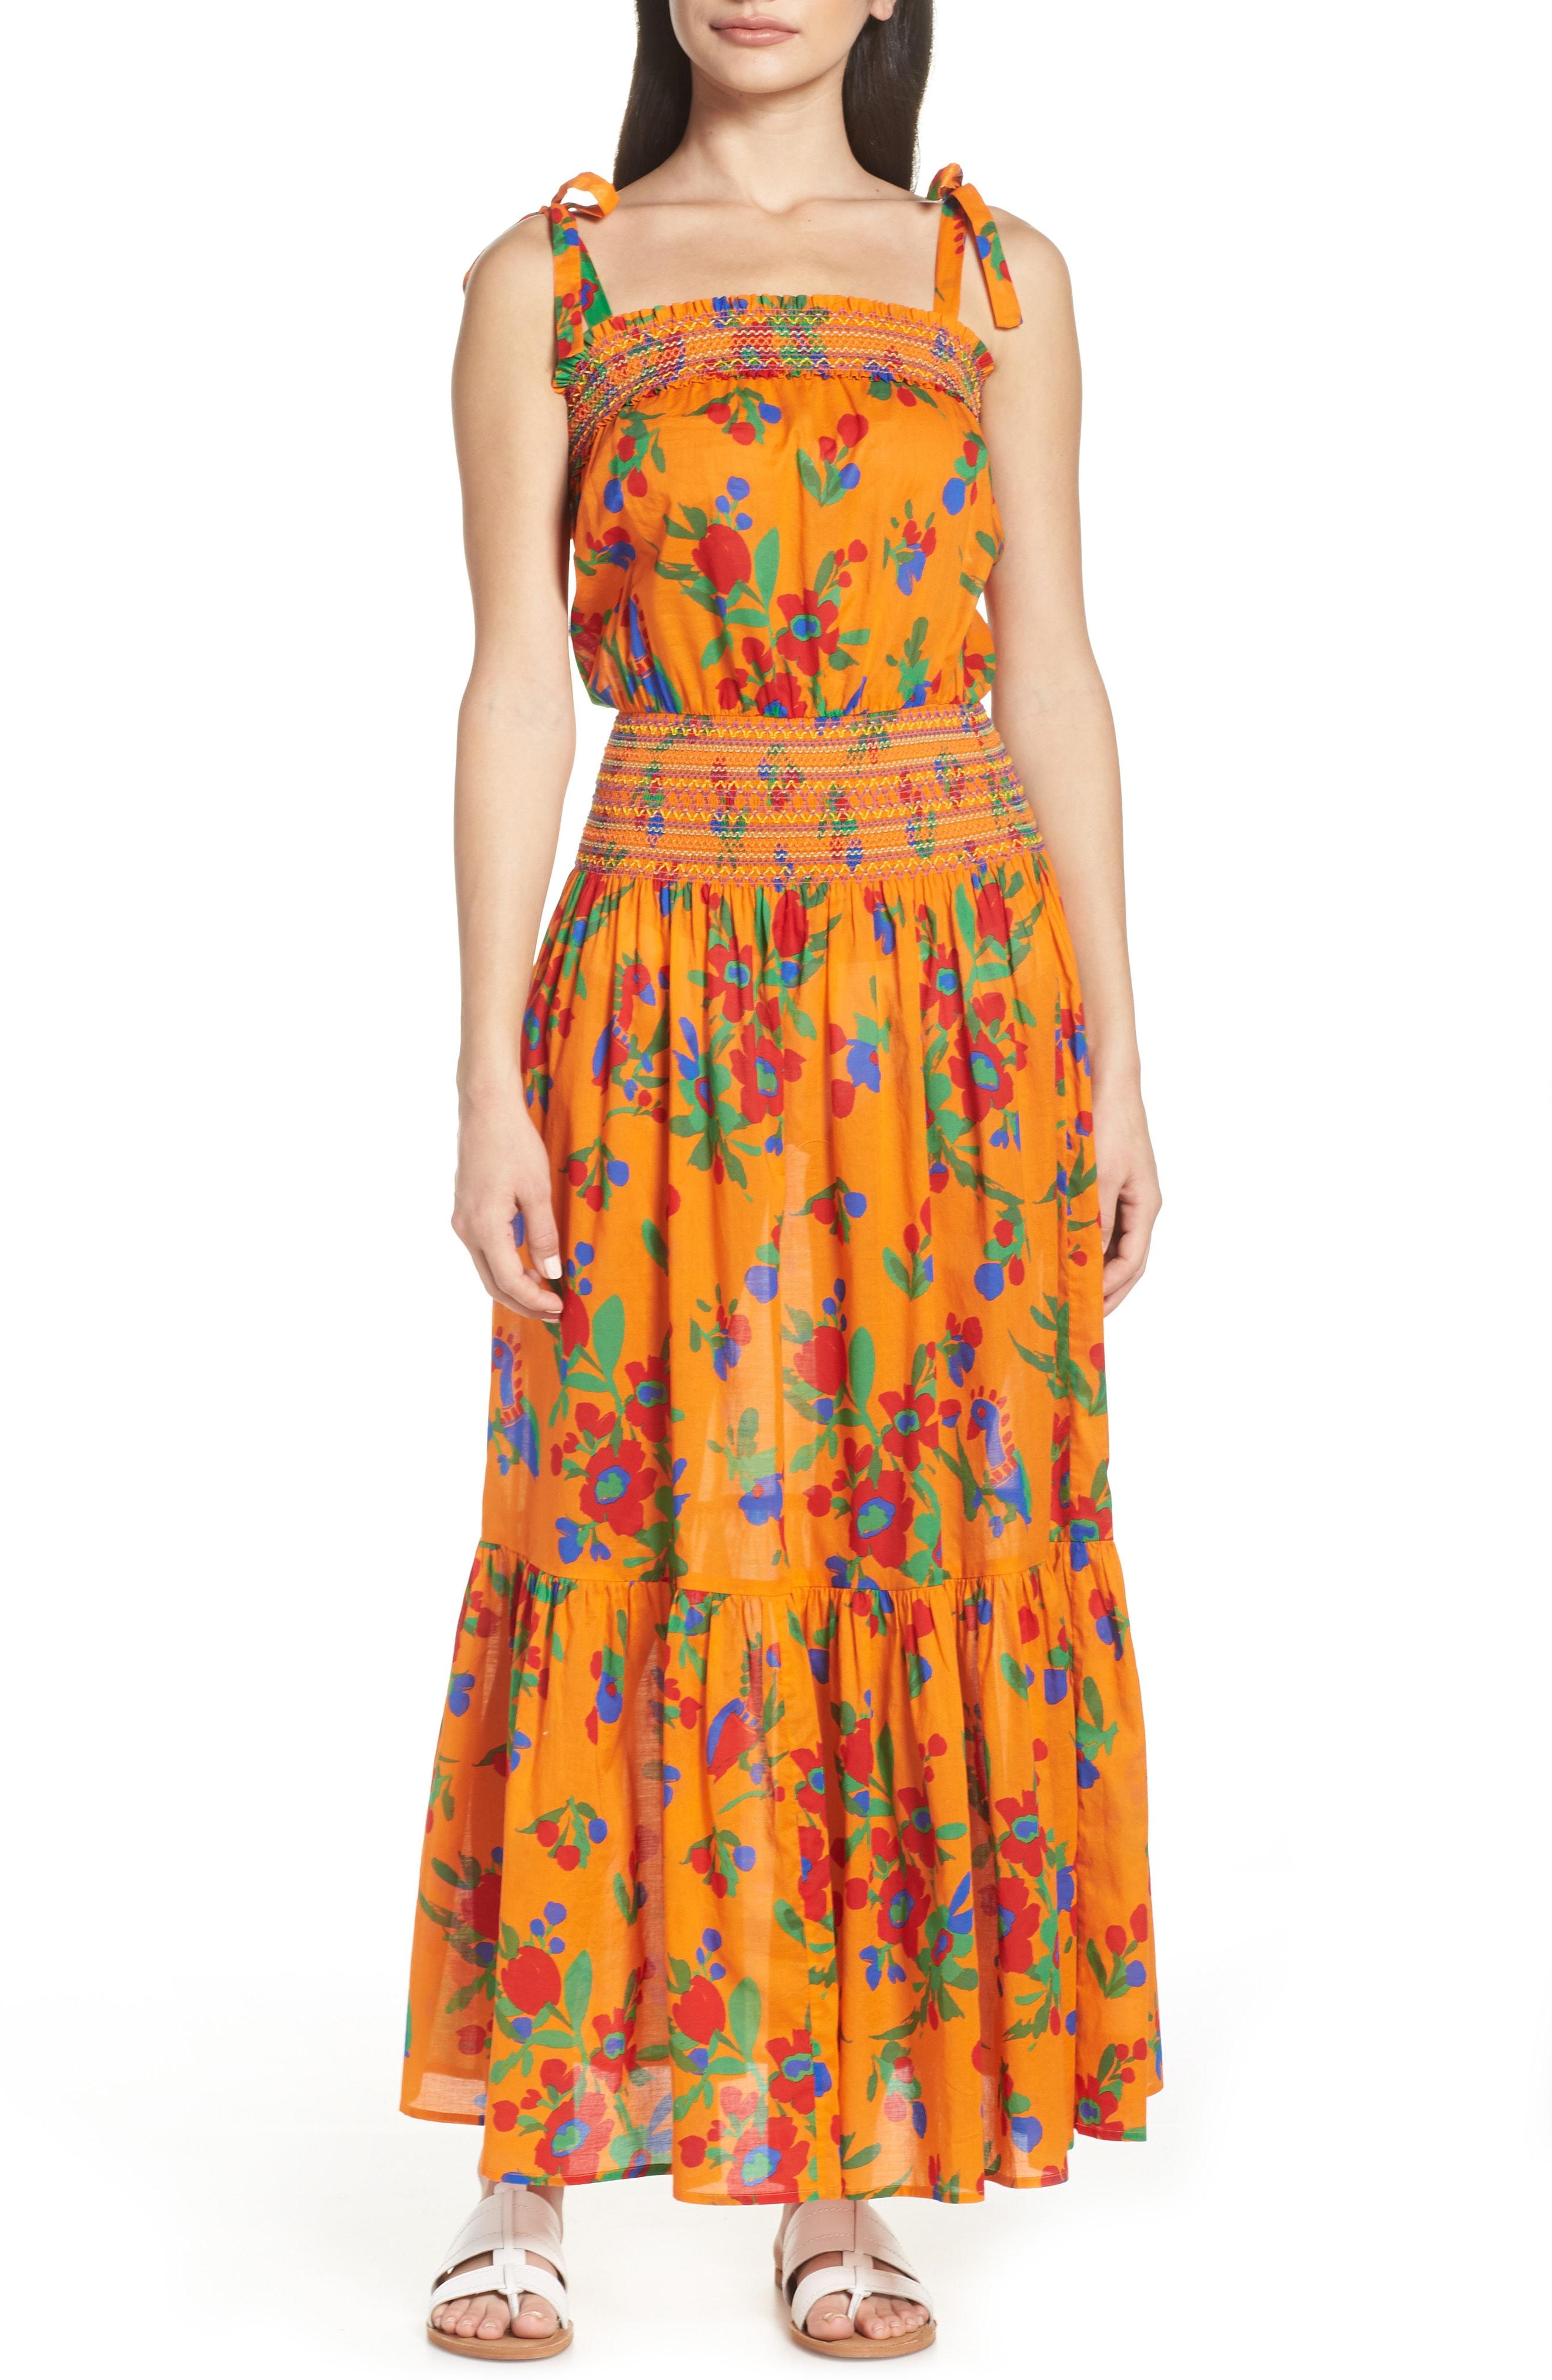 Lyst - Tory Burch Smocked Cover-up Maxi Dress in Orange